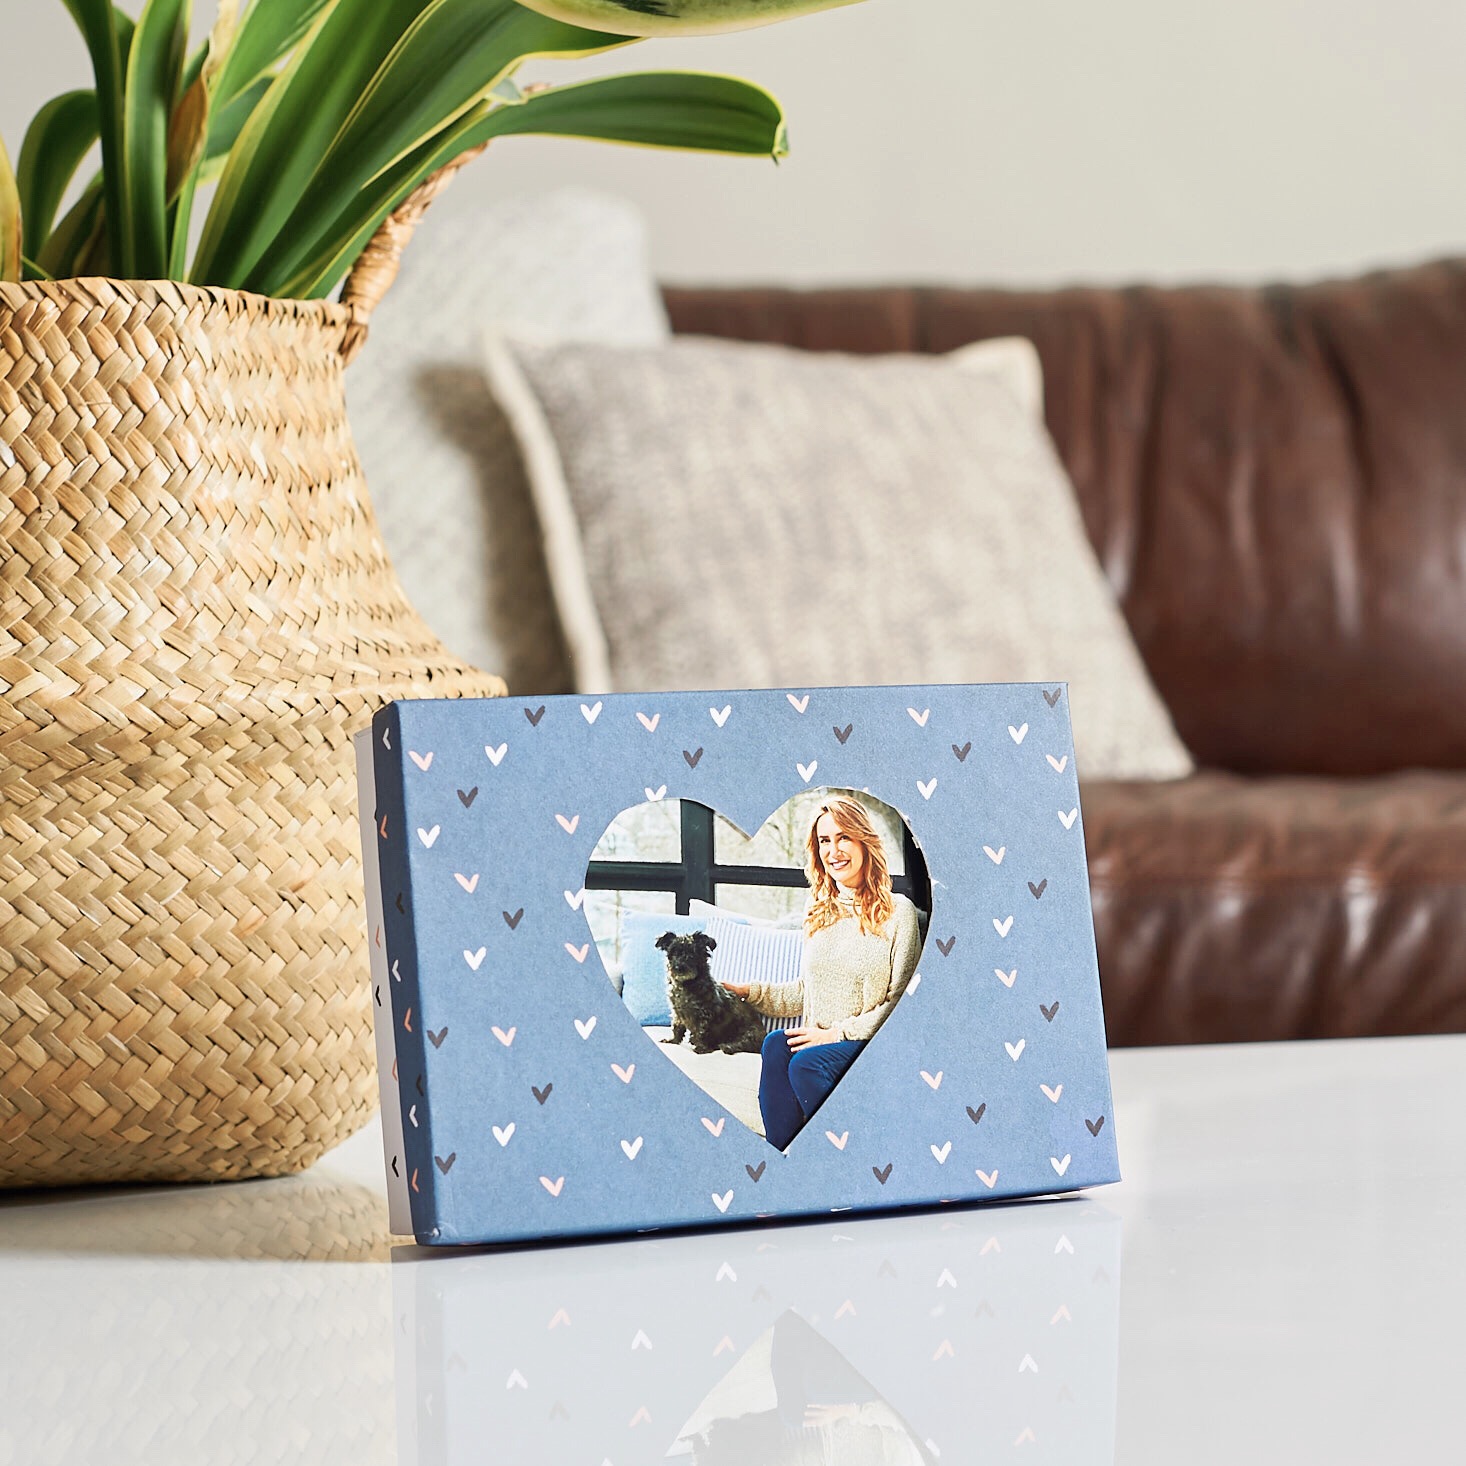 How To Turn a Birchbox Into a Picture Frame!